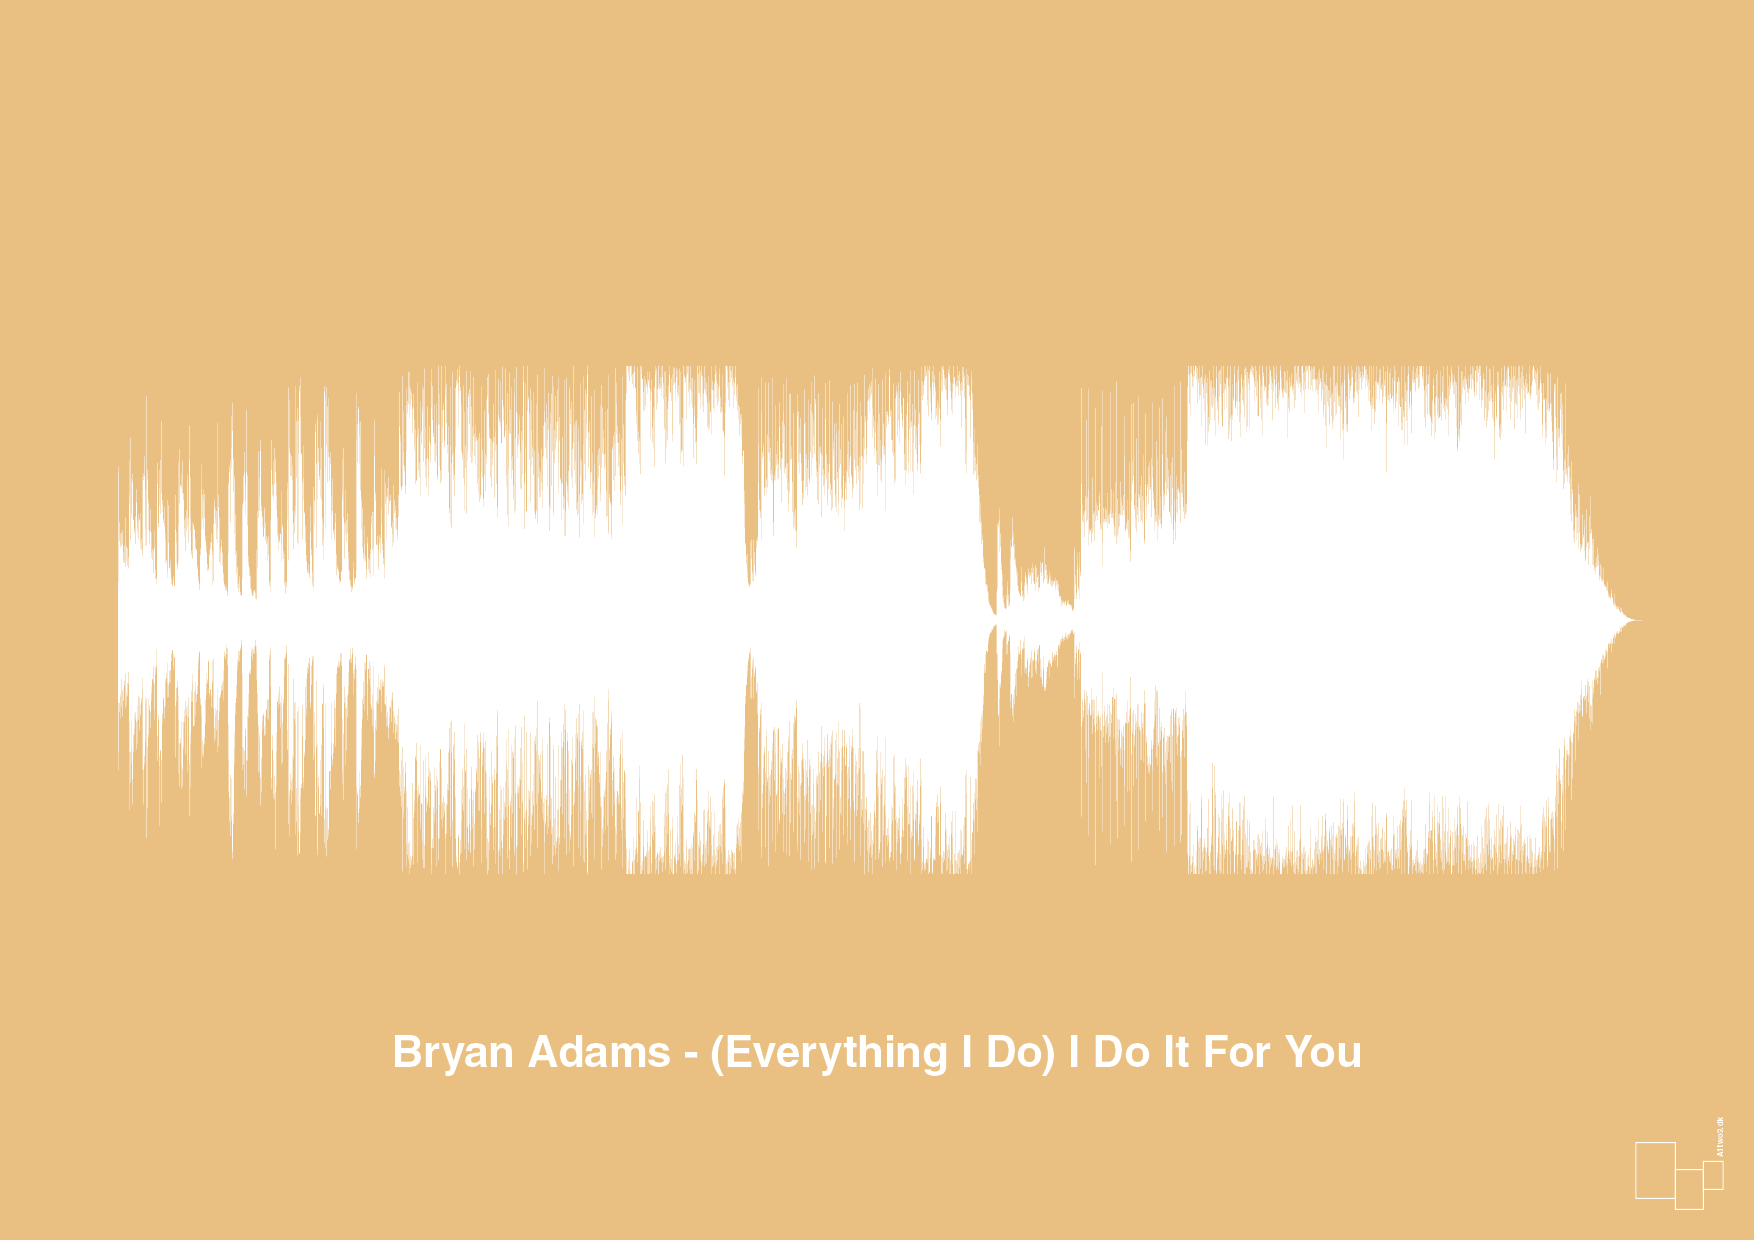 bryan adams - (everything i do) i do it for you - Plakat med Musik i Charismatic